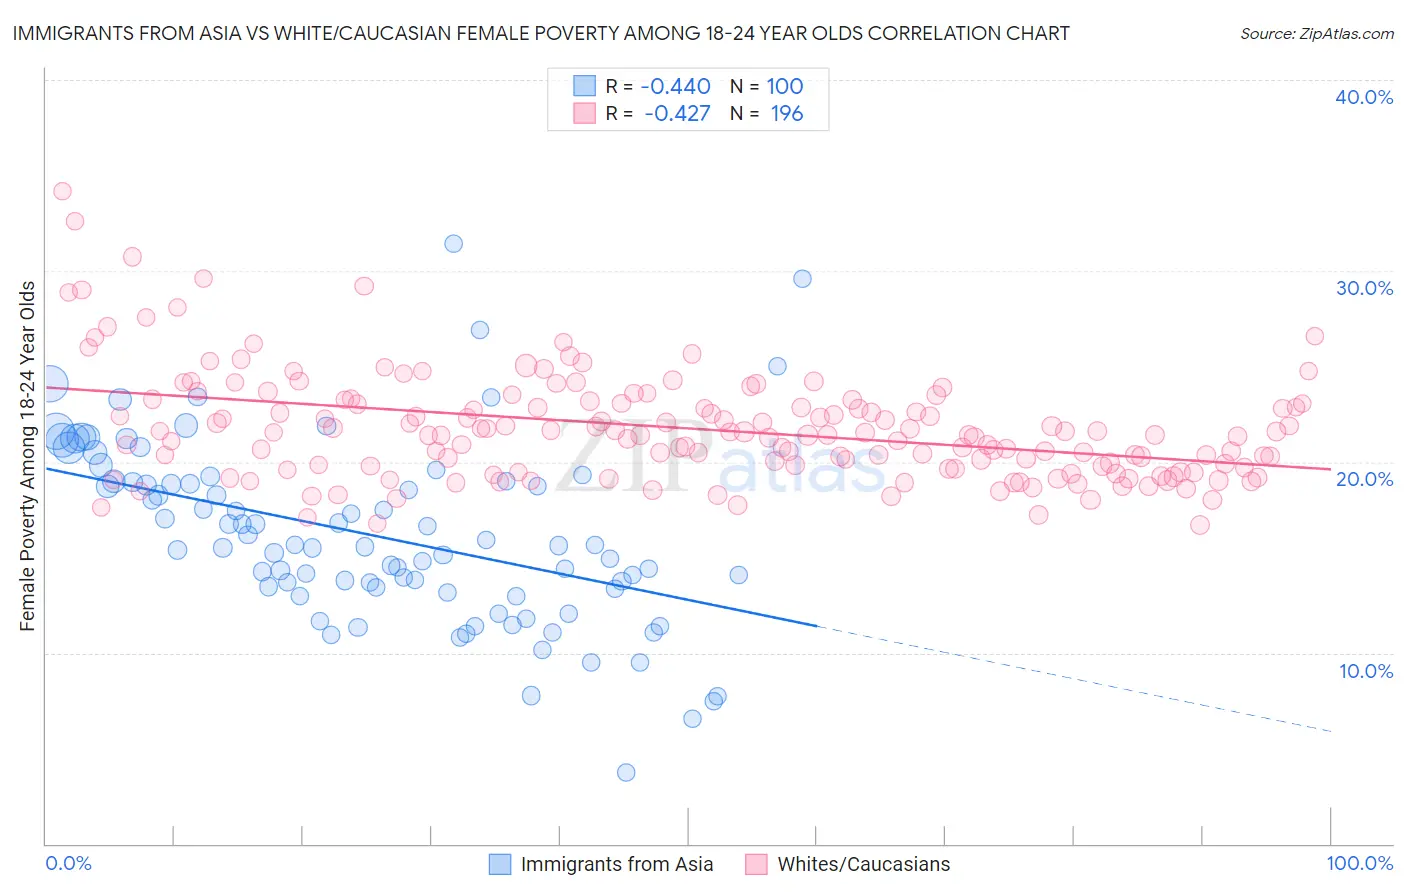 Immigrants from Asia vs White/Caucasian Female Poverty Among 18-24 Year Olds